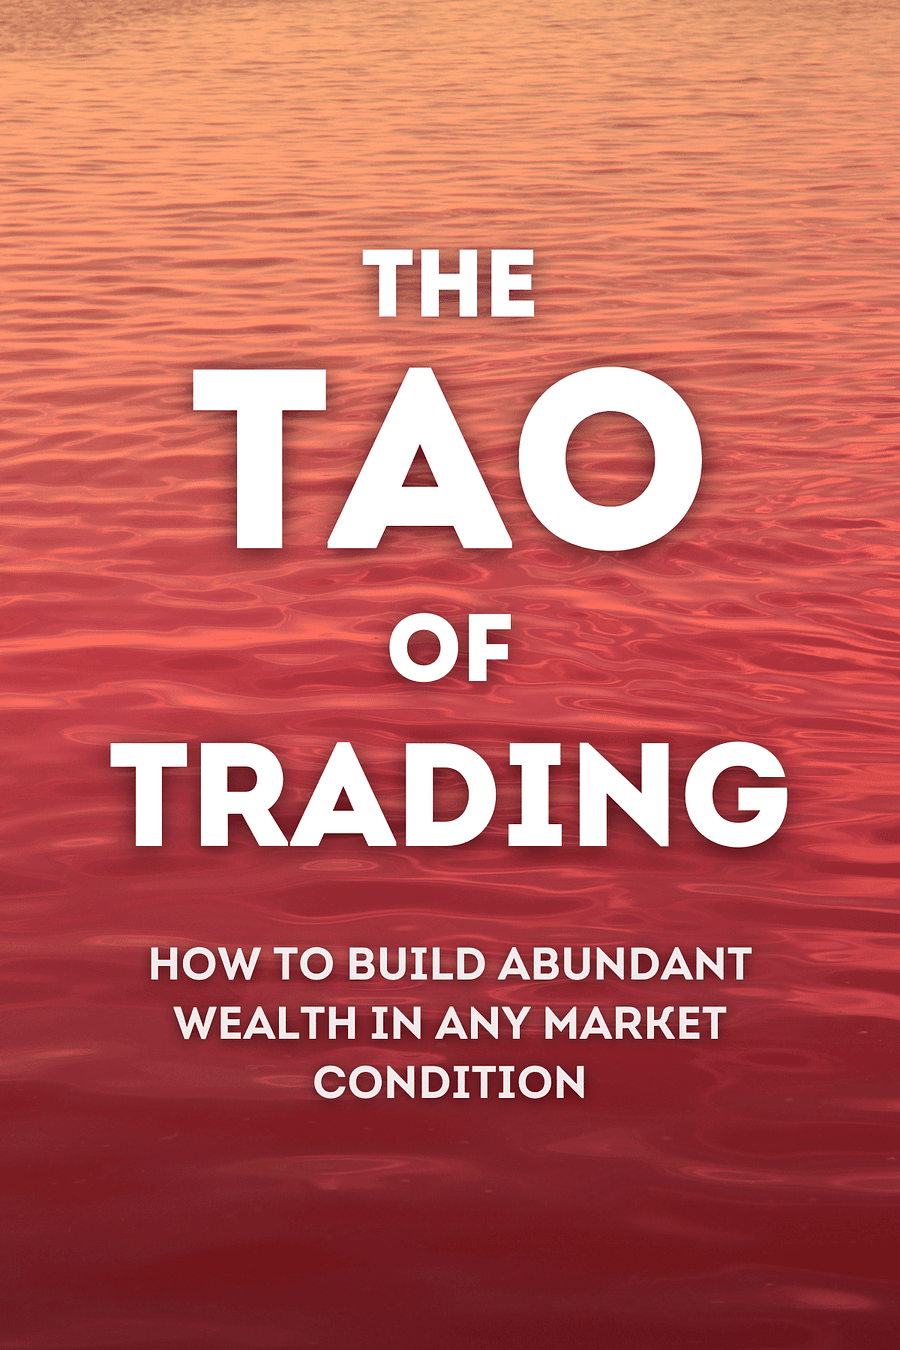 The Tao of Trading by Simon Ree - Book Summary